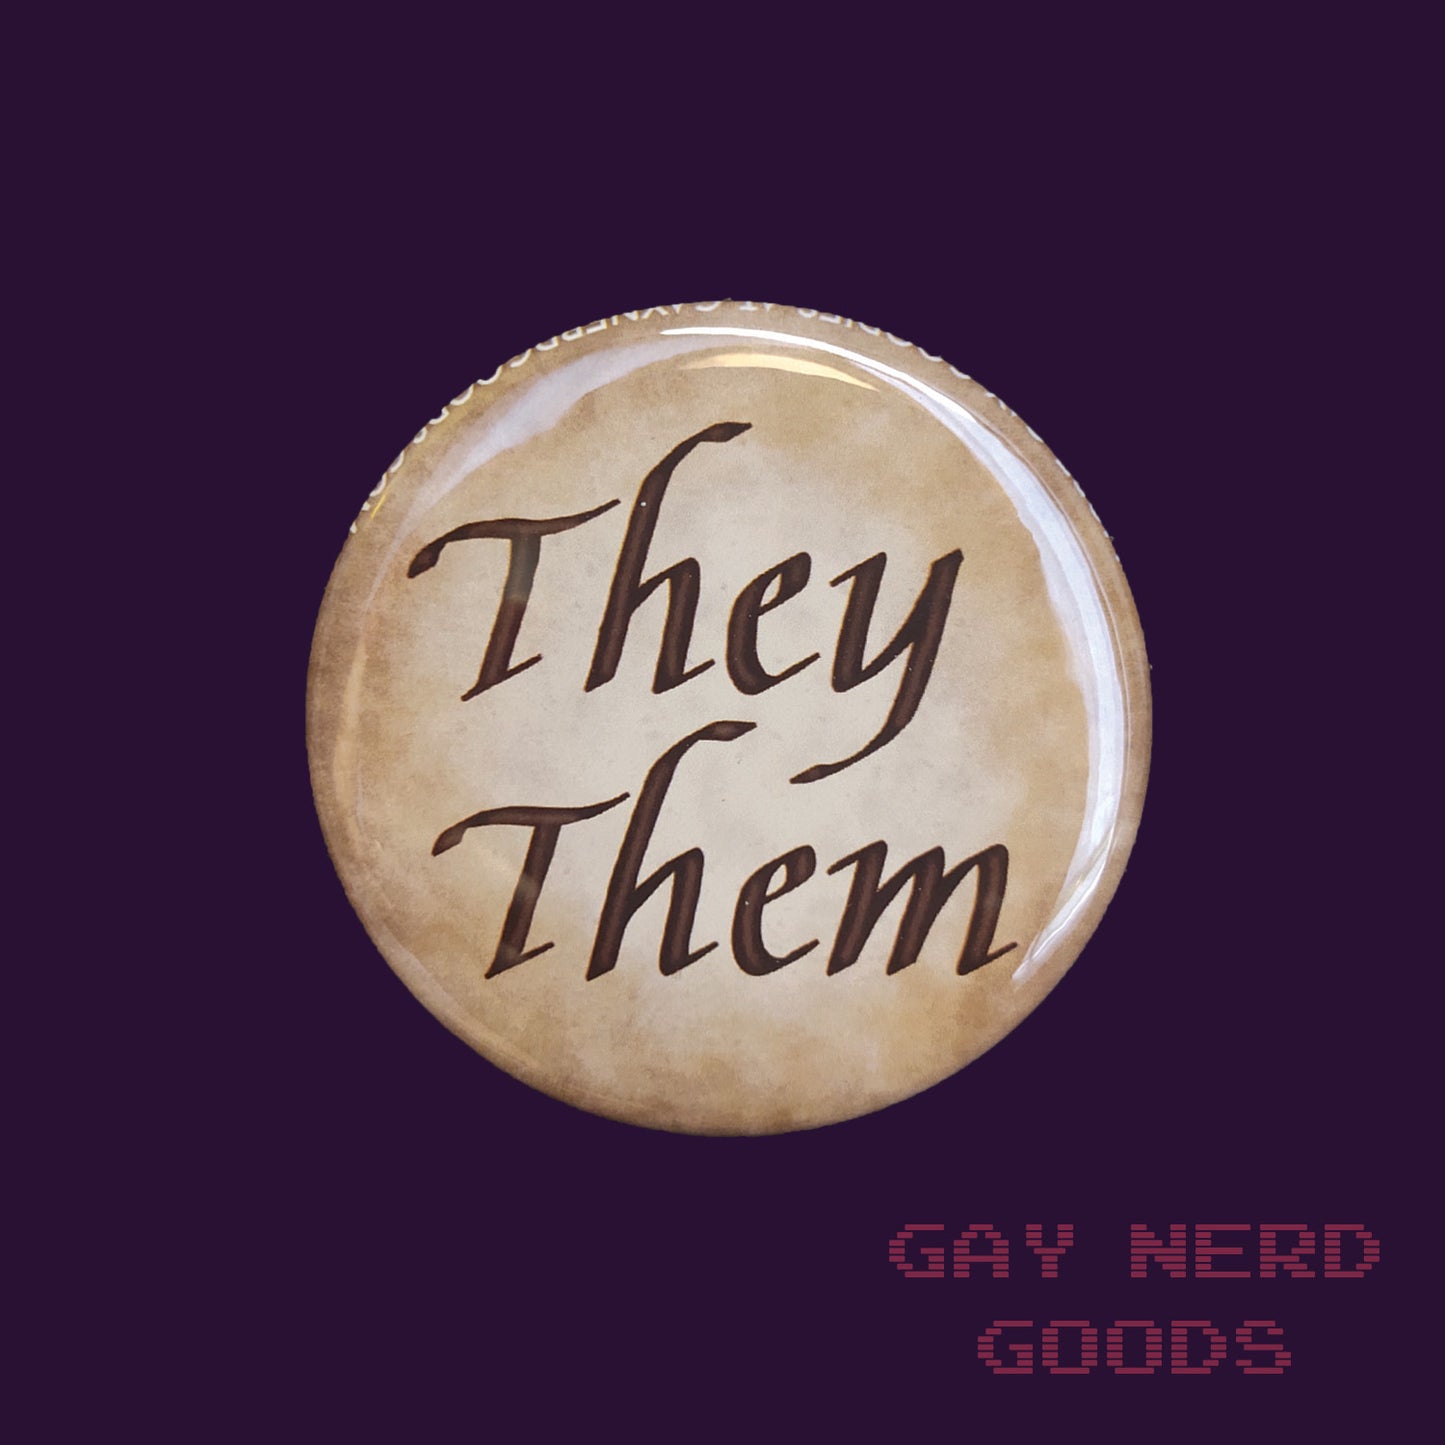 they them large calligraphy pronoun button on a dark purple background